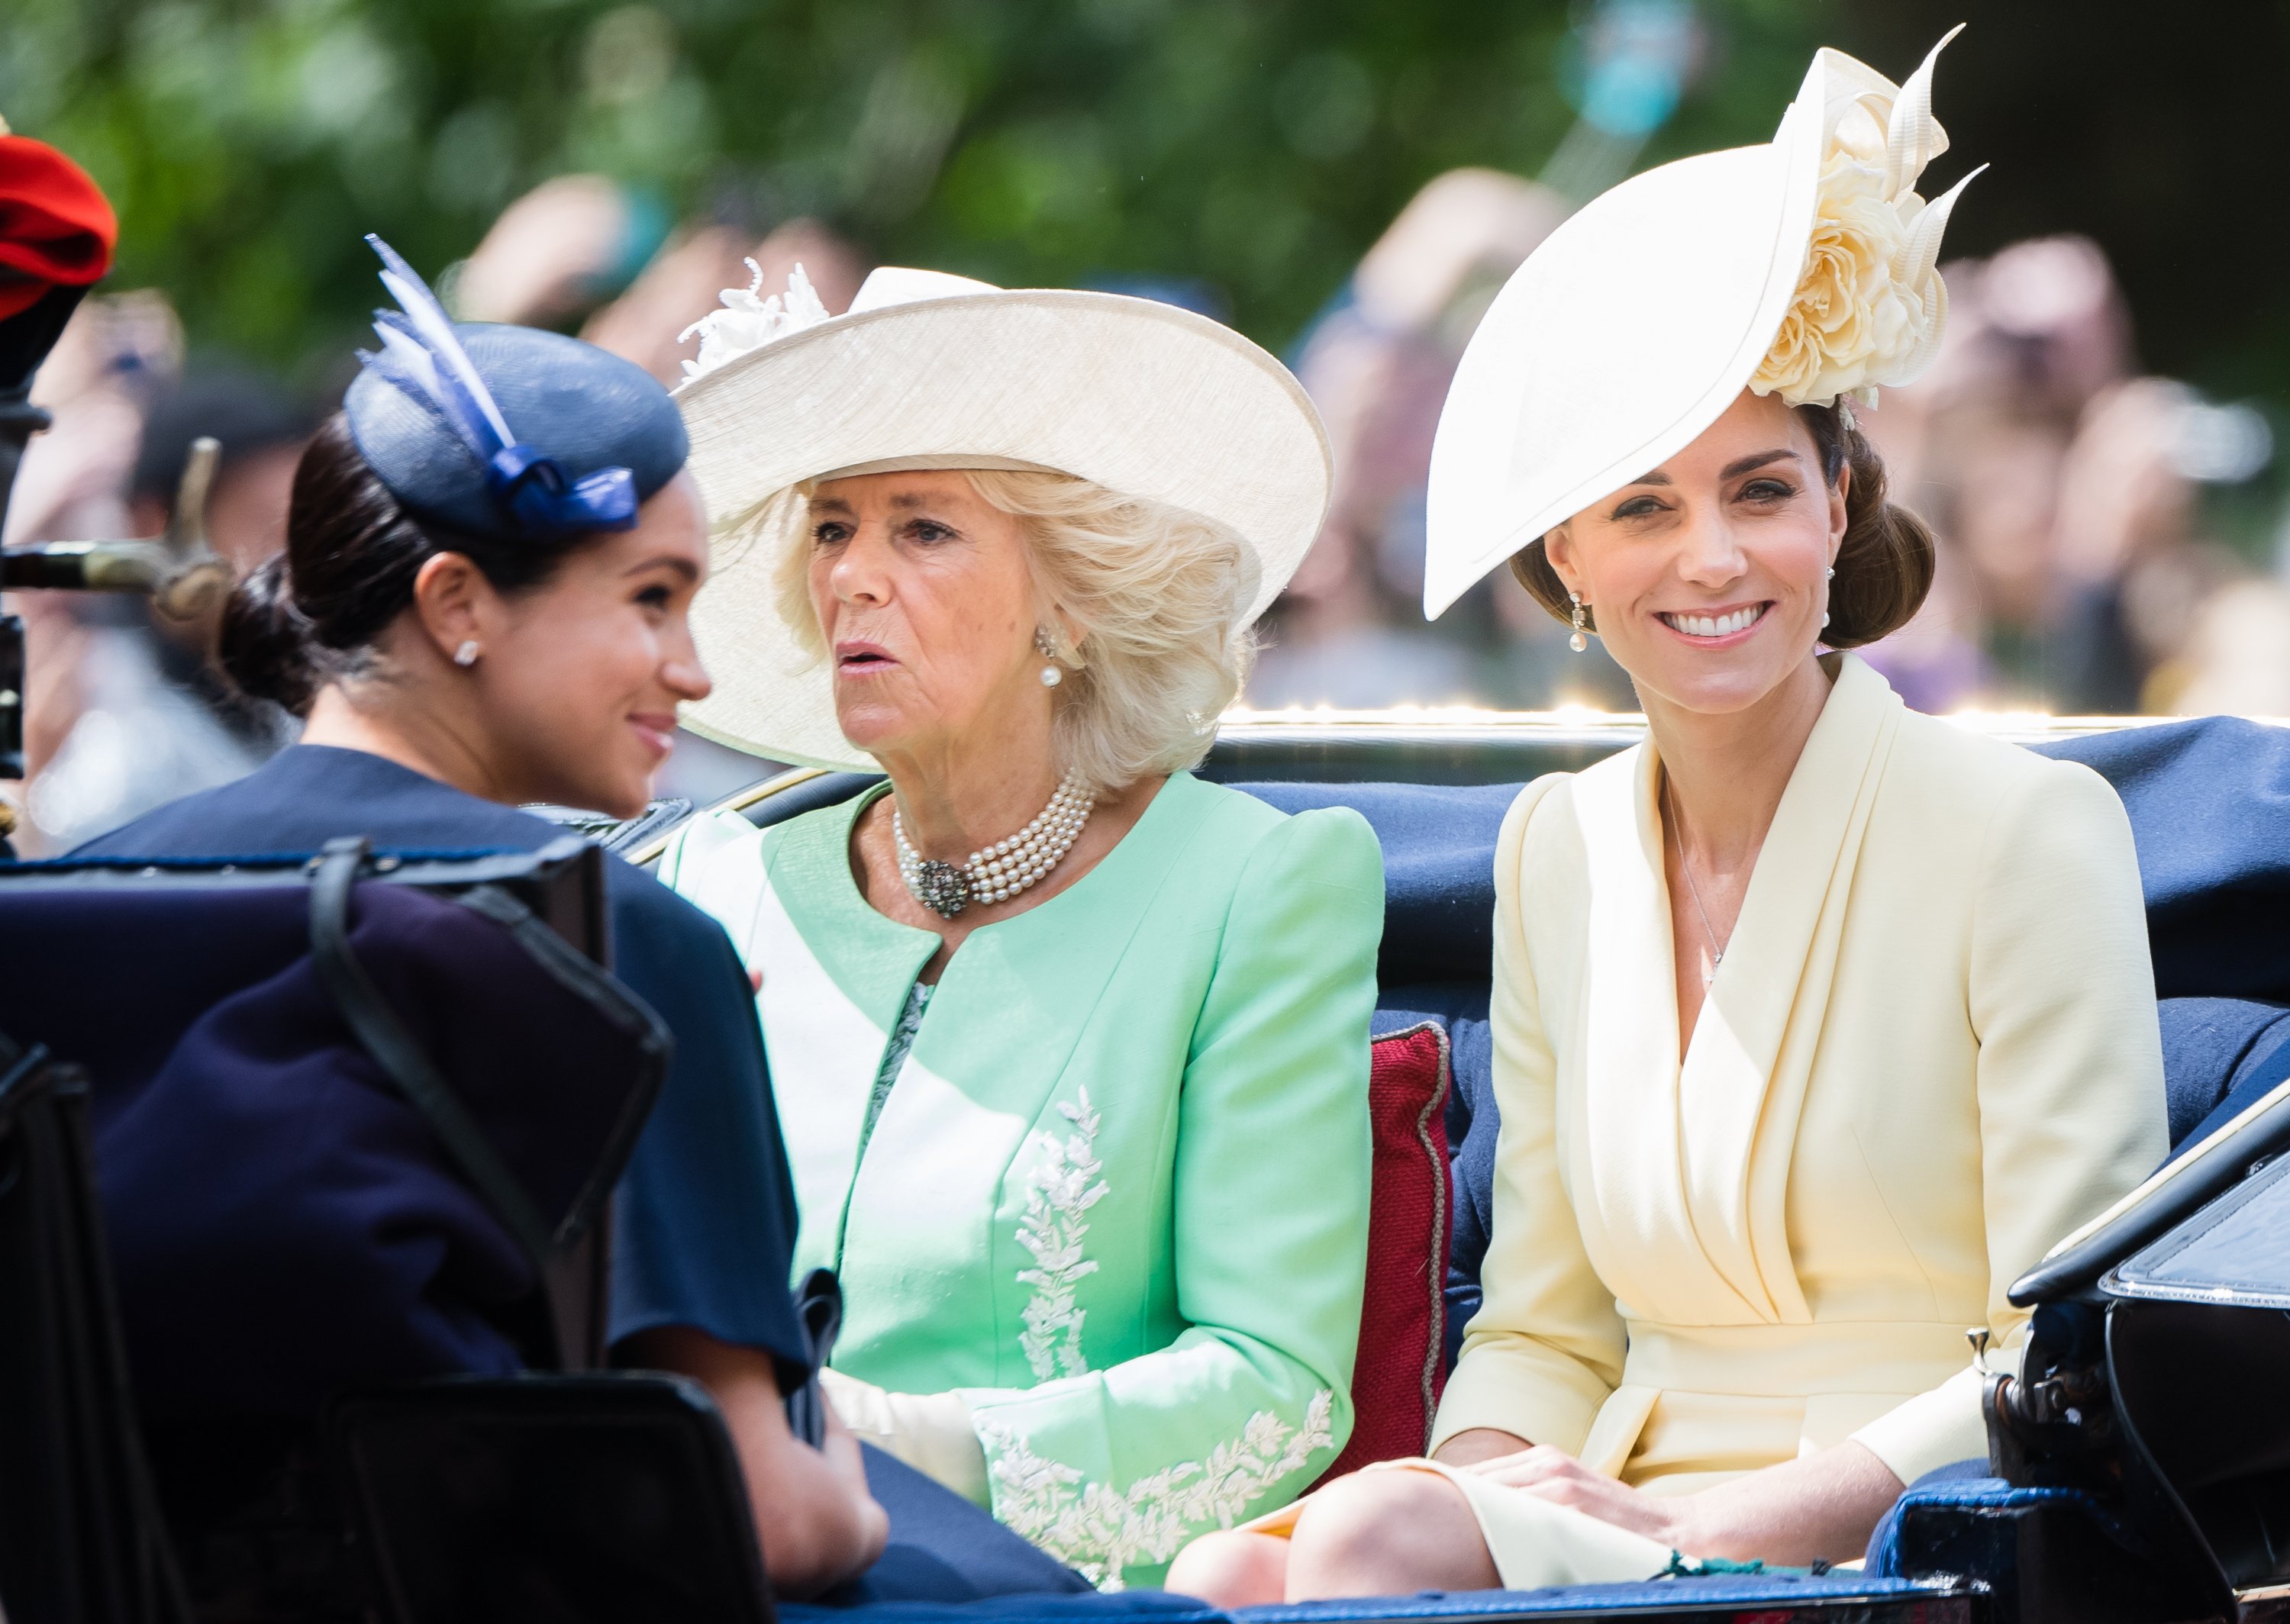 Duchess Meghan, Duchess Camilla and Duchess Kate ride a carriage down The Mall during Trooping The Color on June 8, 2019 in London, England.  |  Source: Getty Images